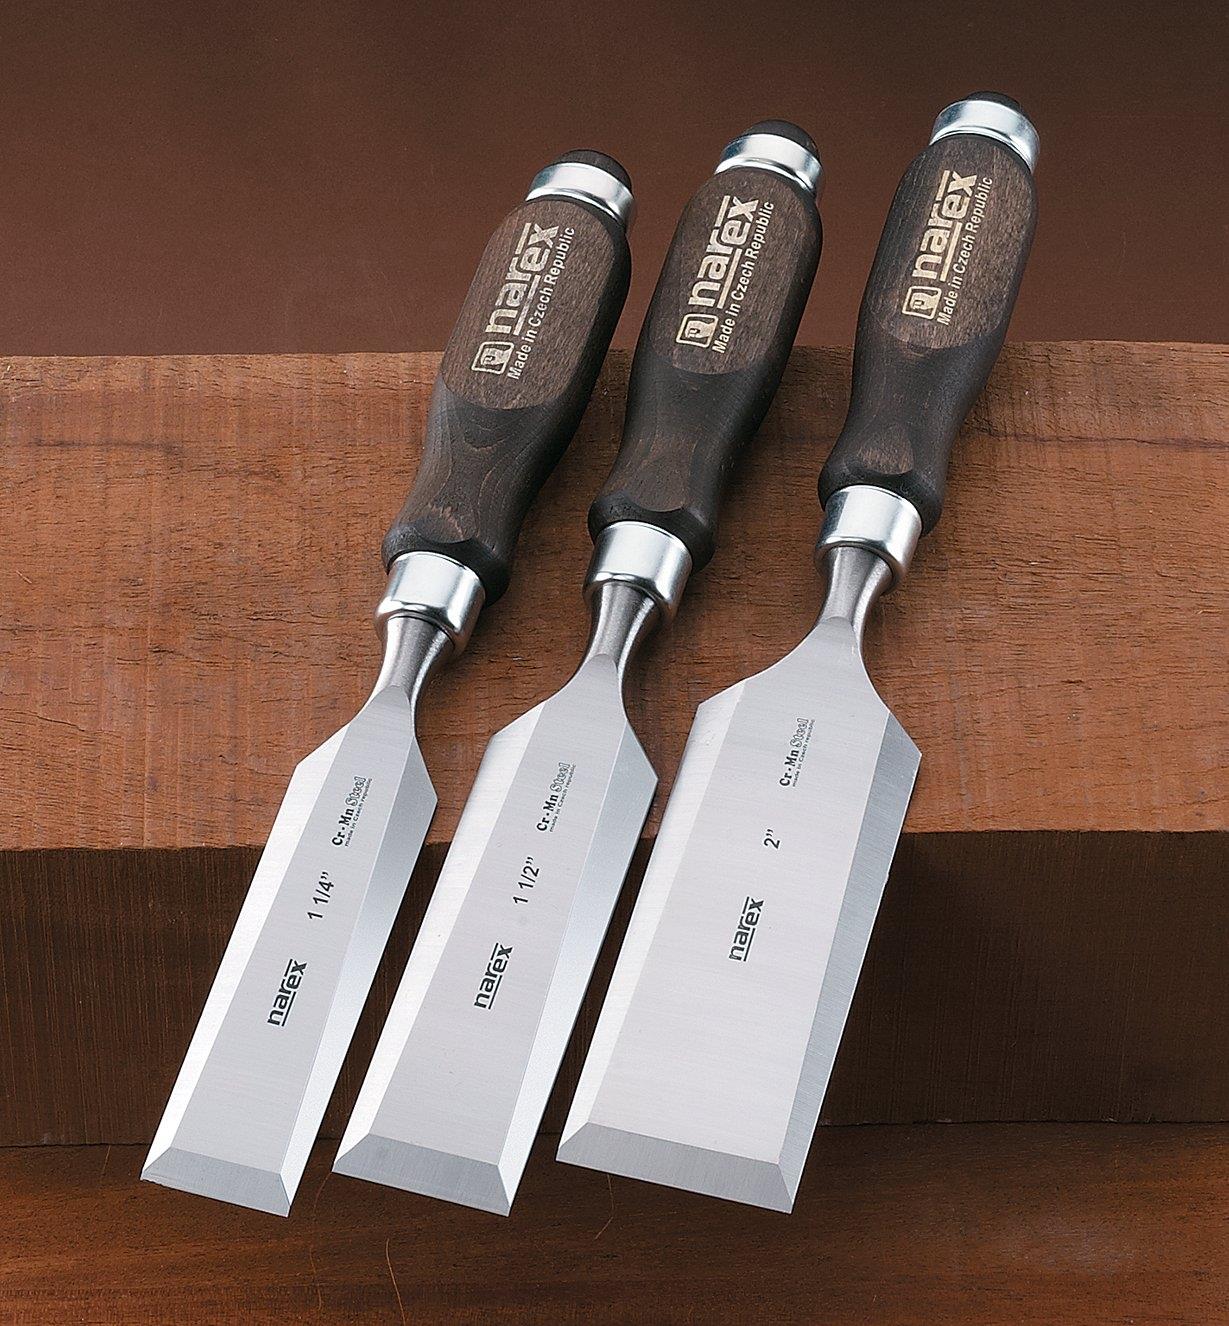 10S0978 - Narex Classic Bevel-Edge Chisels, Set of 3 (1 1/4" to 2")